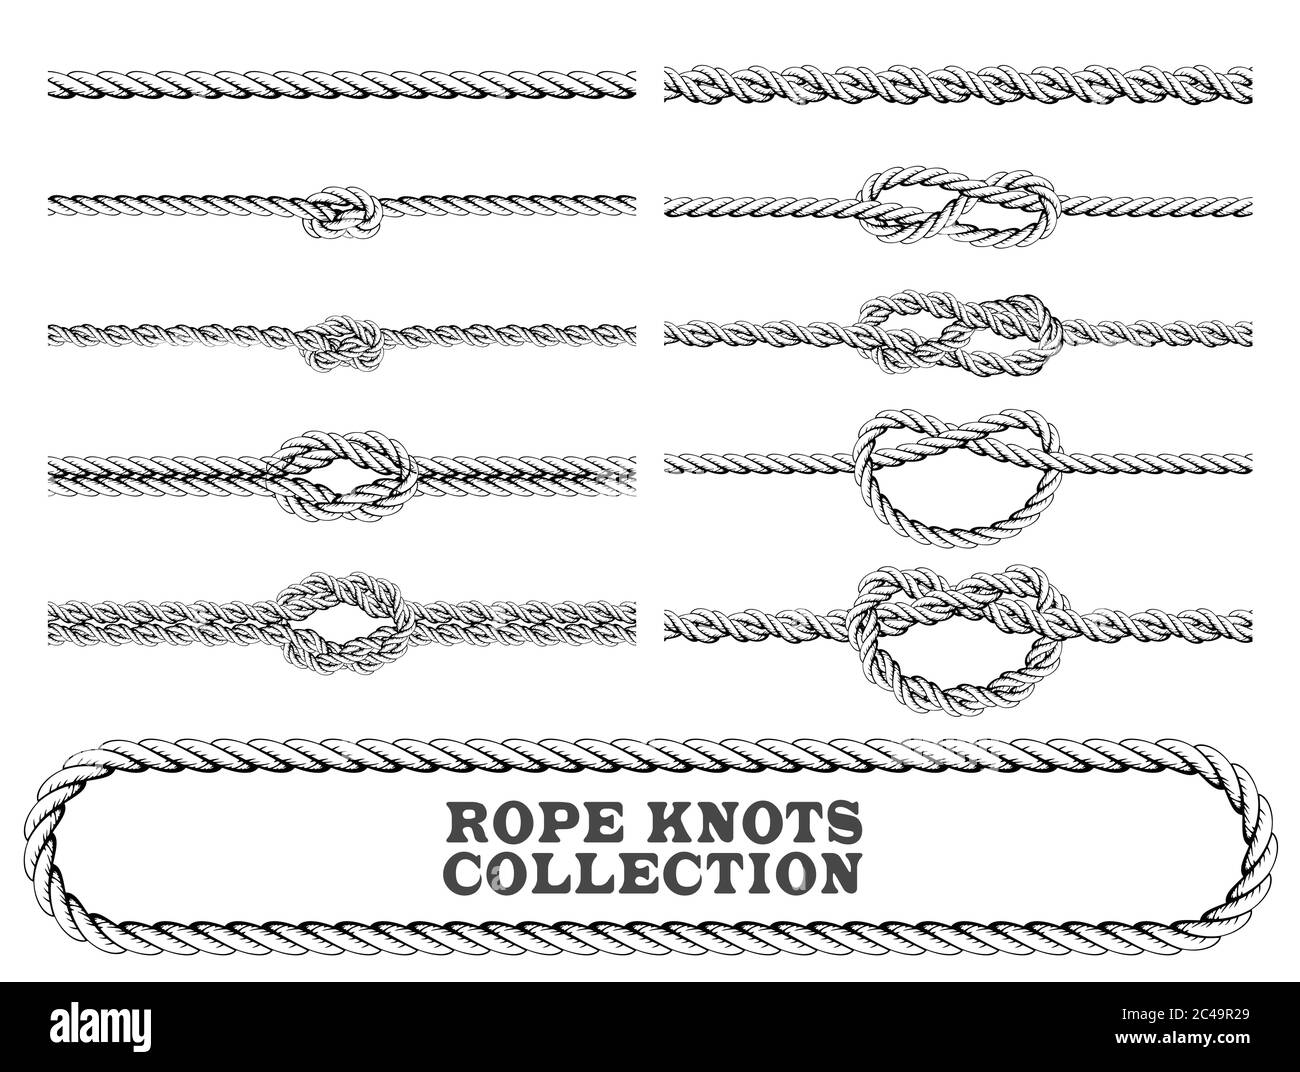 Rope knots collection. Overhand, Figure of eight and square knot. Seamless decorative elements. Vector illustration. Stock Vector